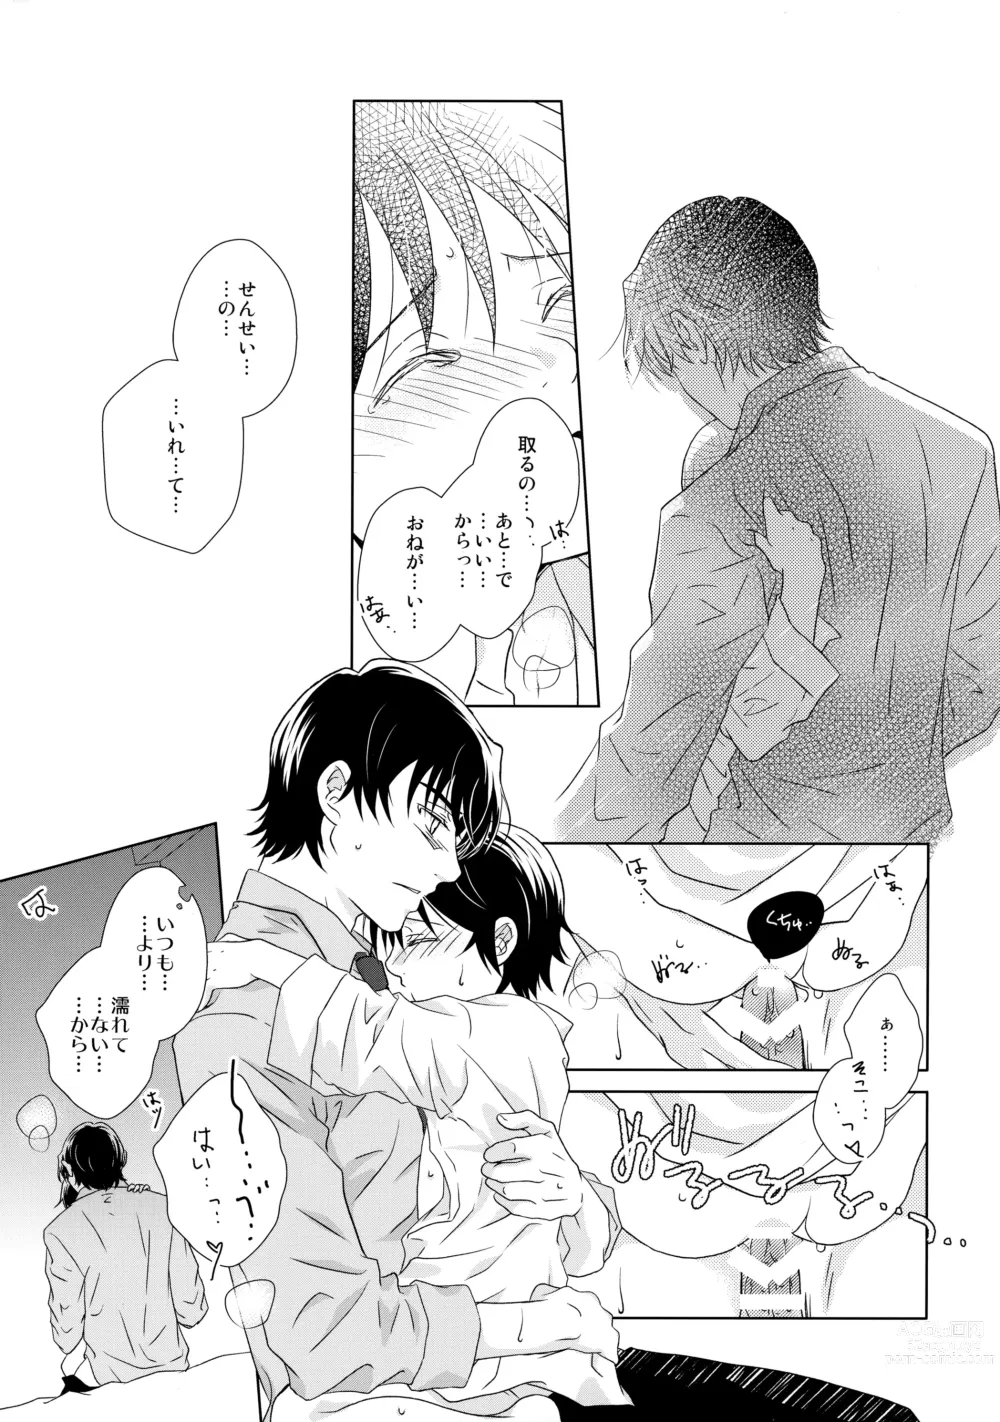 Page 10 of doujinshi Butterfield 8